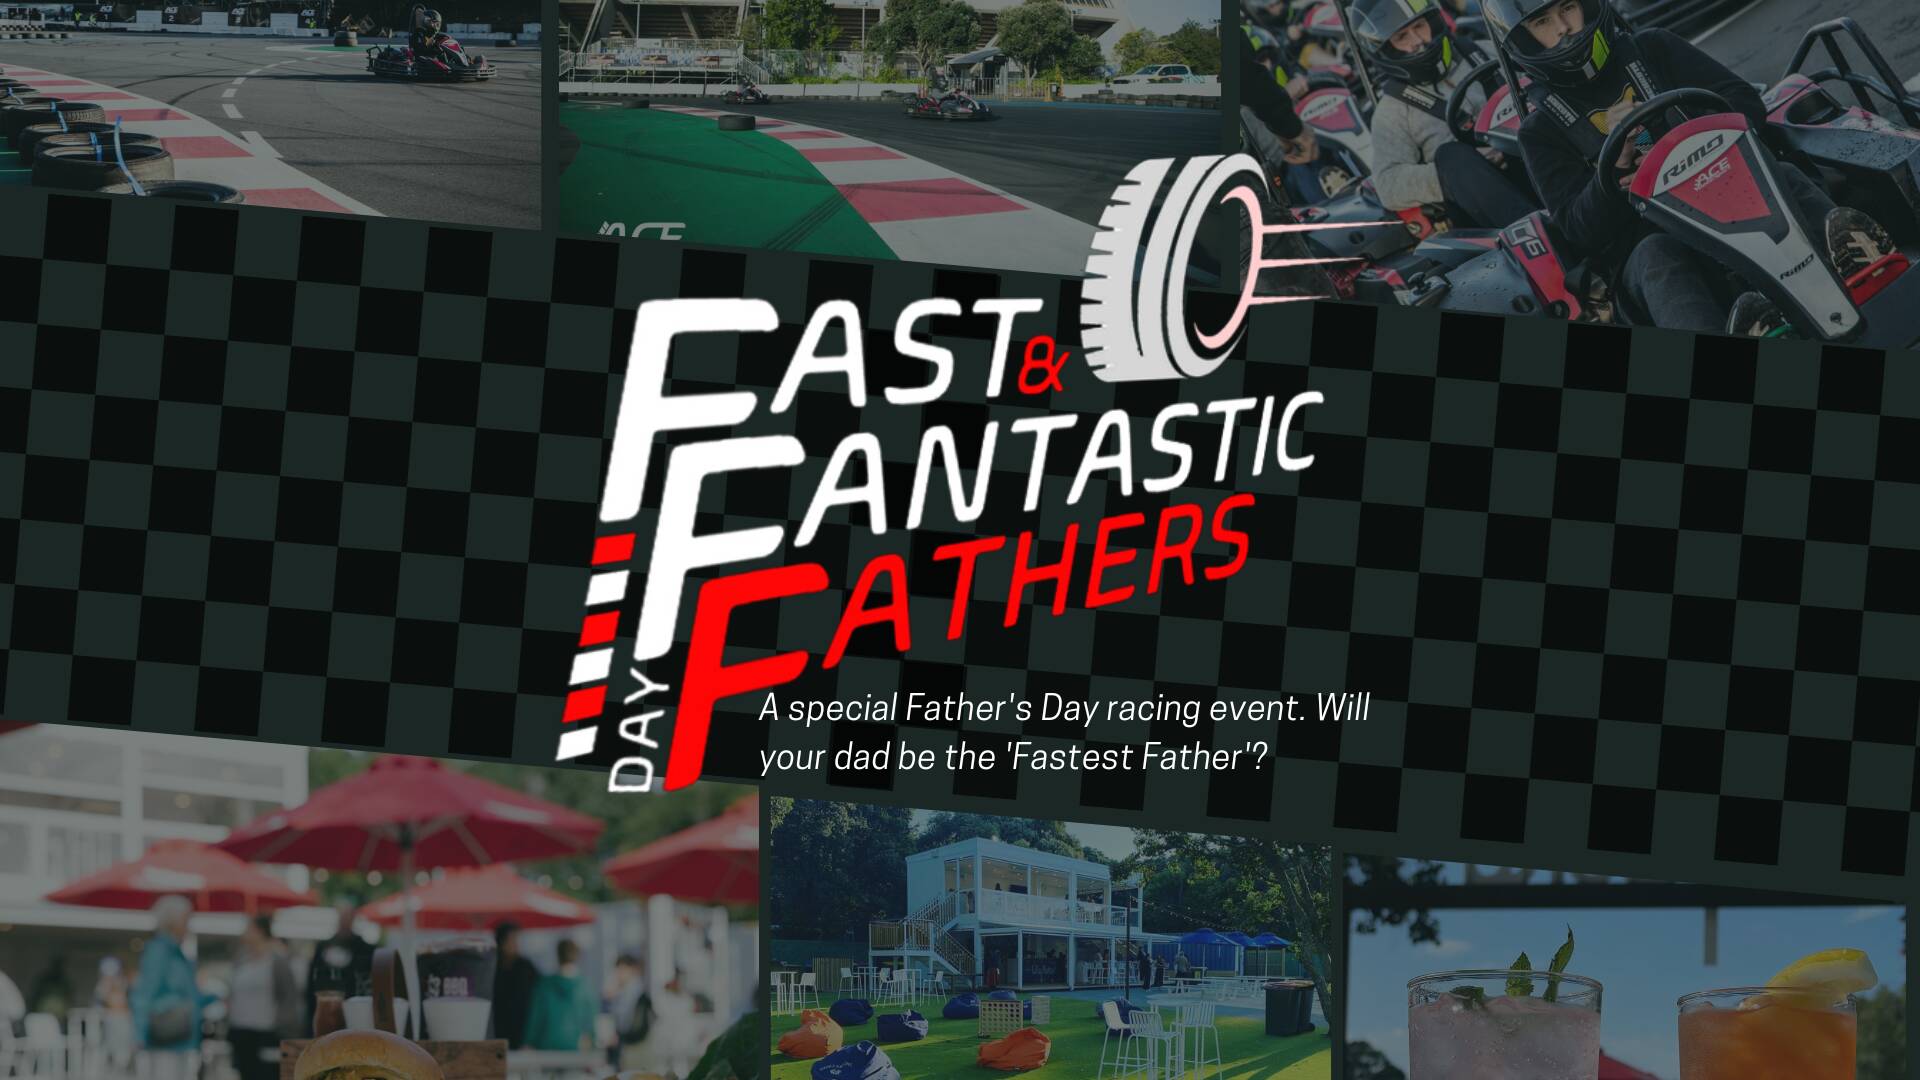 Fast & Fantastic Fathers - Father's Day Event